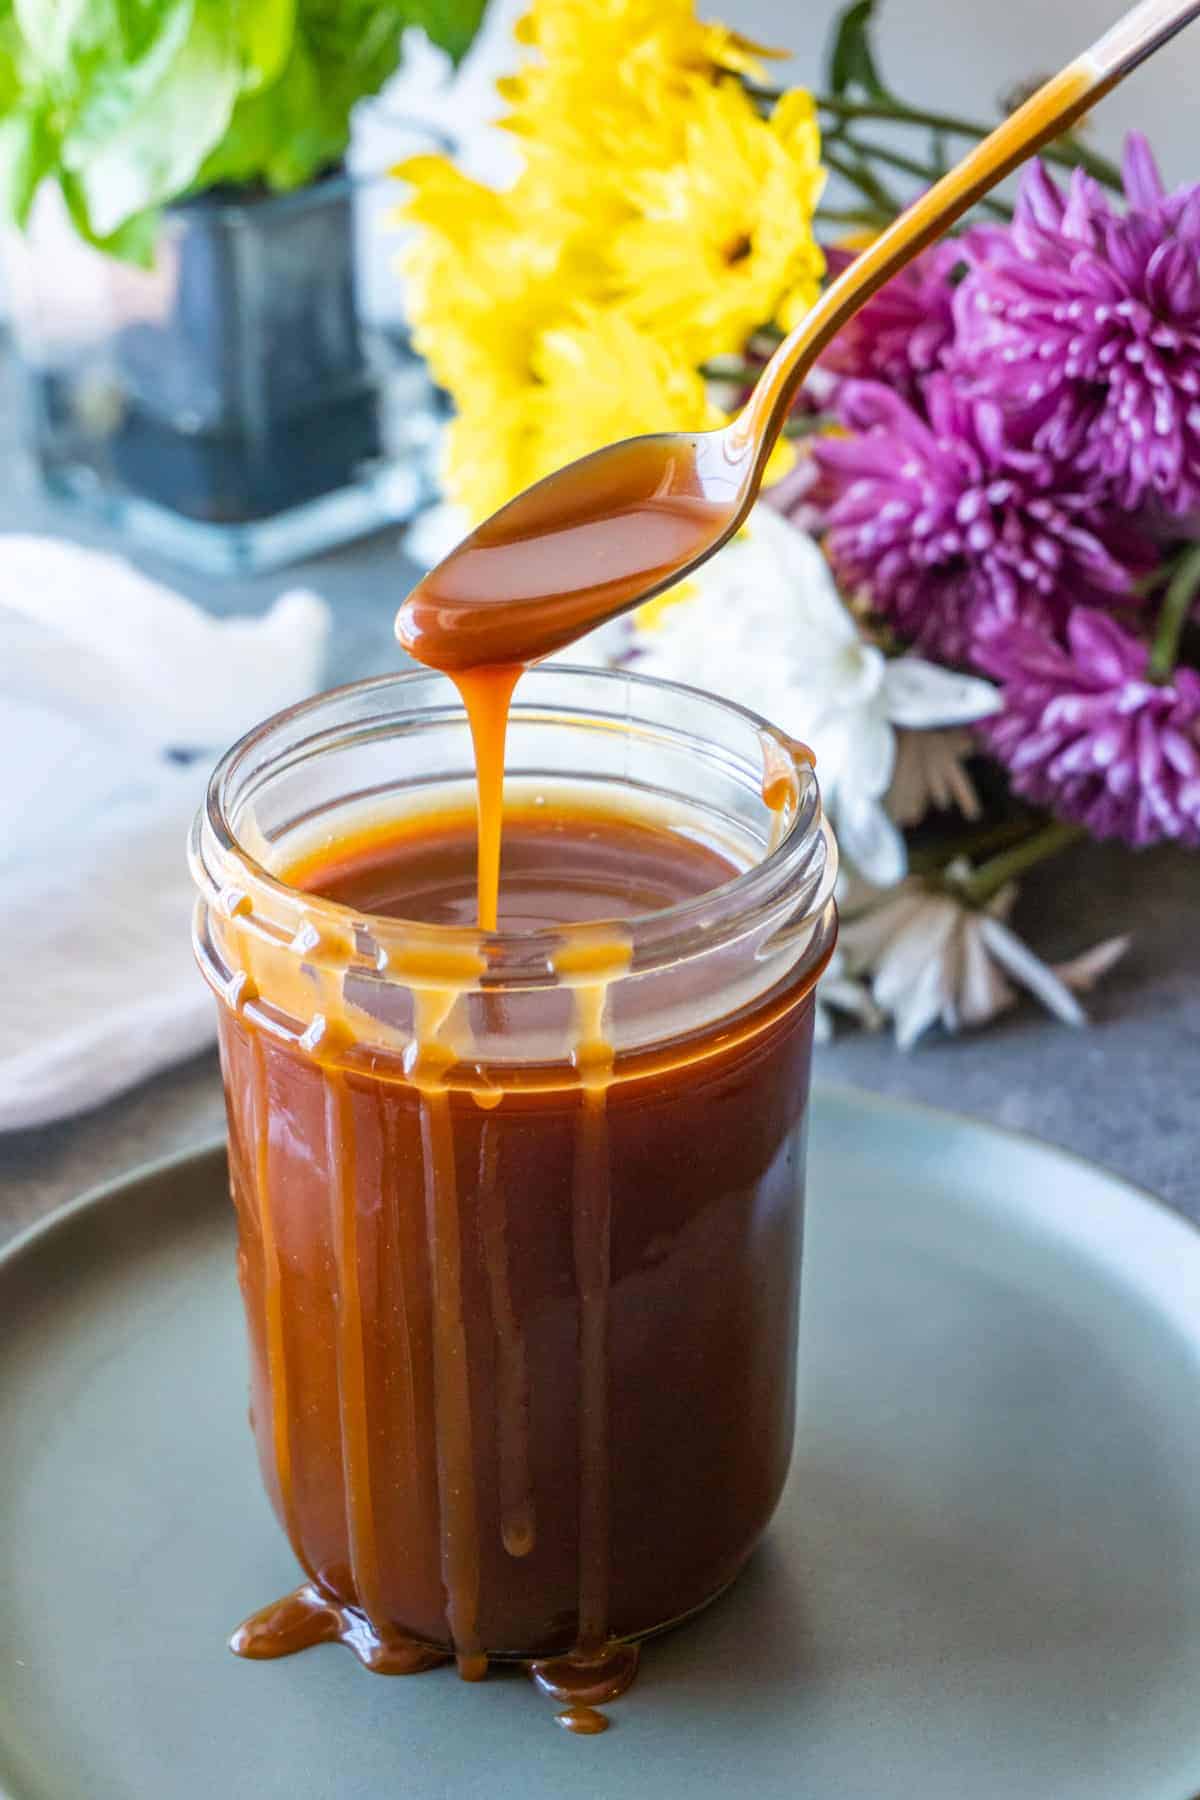 Caramel dripping over side of jar